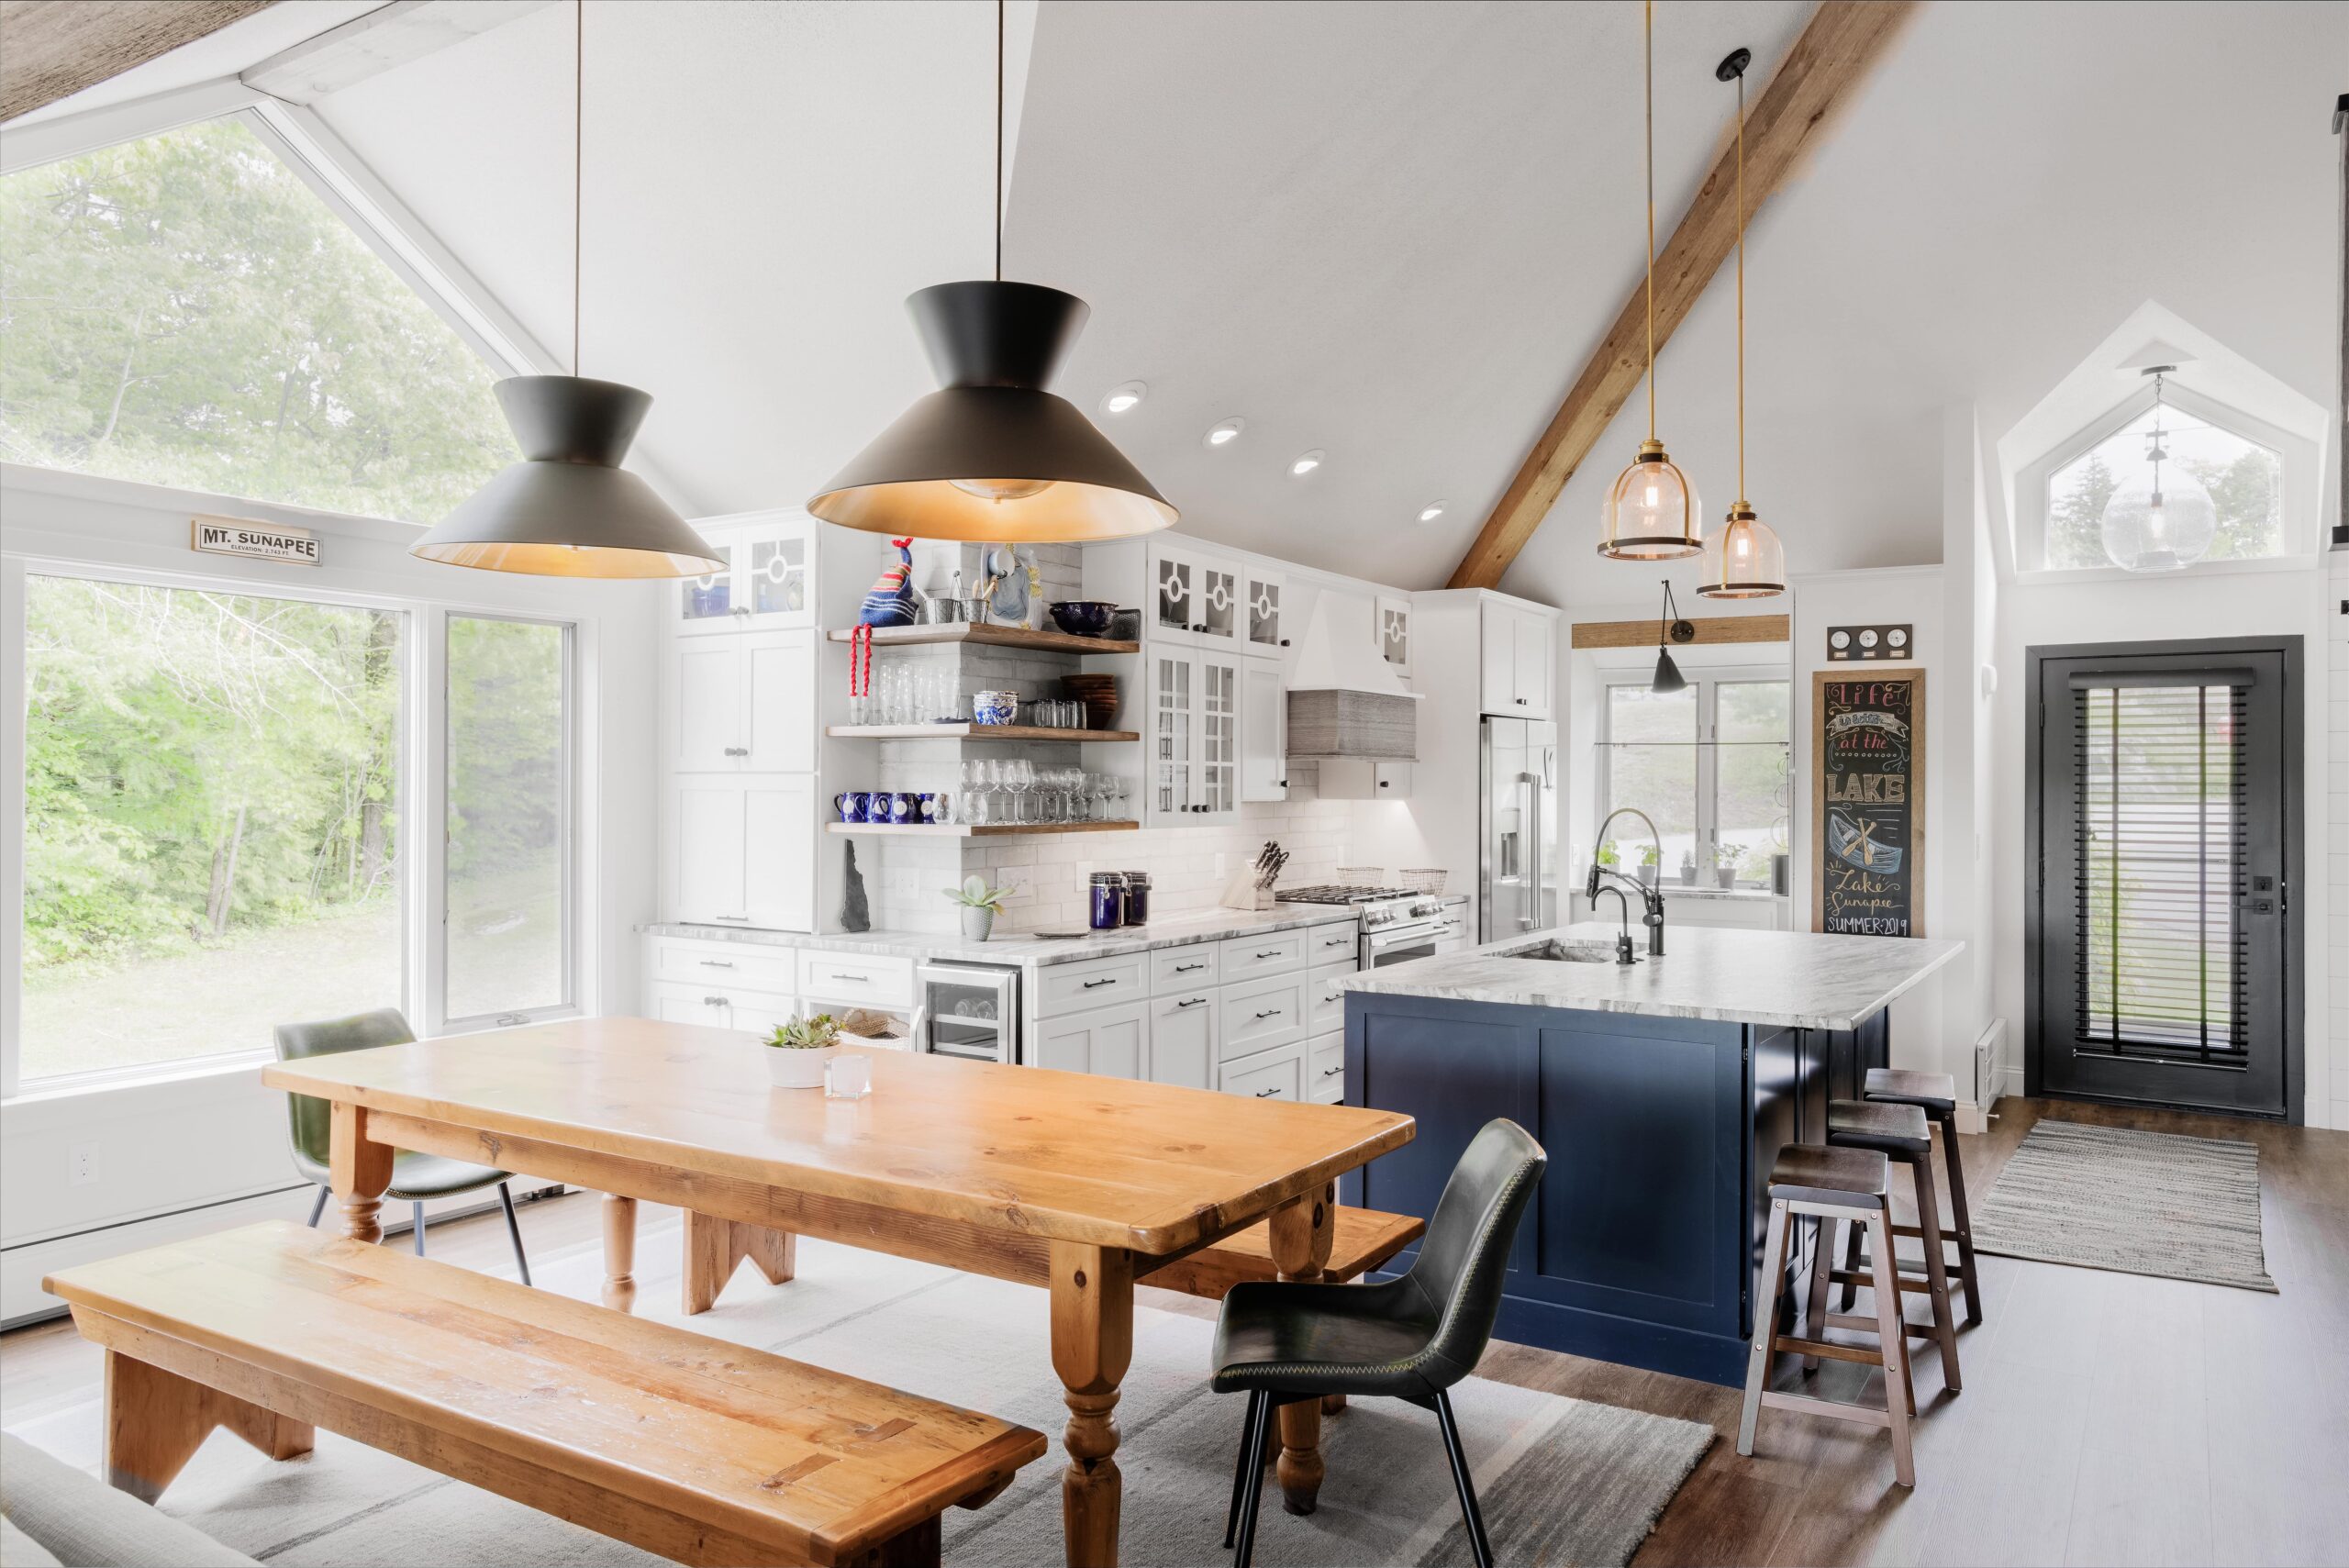 Whole-home remodel with open floor plan with white cabinets and large wood table. Exposed woodgrain ceiling beams in far corner, on white ceiling.